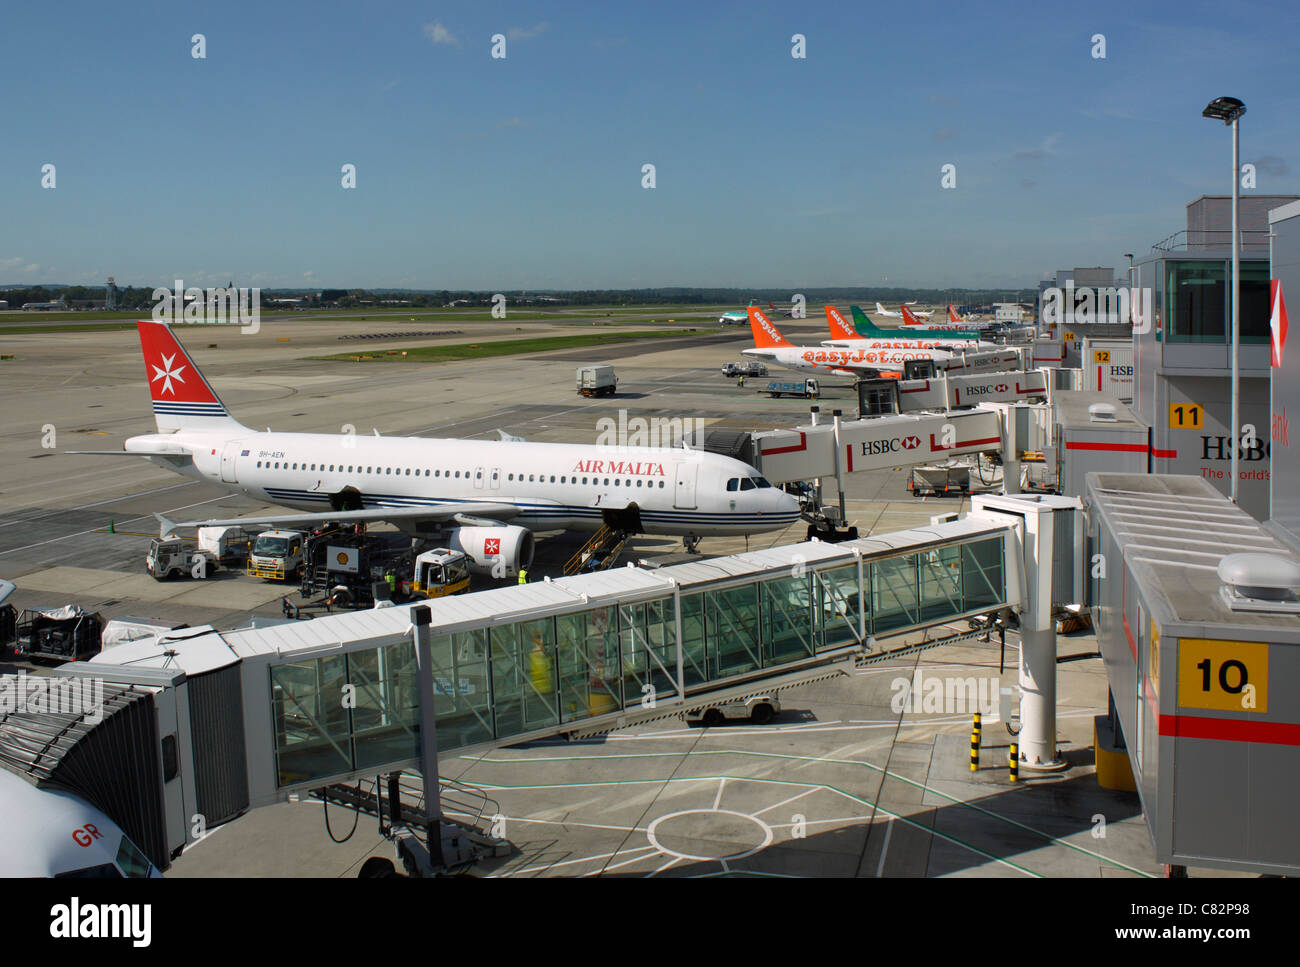 Many aircraft parked on the ground at Gatwick Airport. Jet plane planes air travel transport Stock Photo